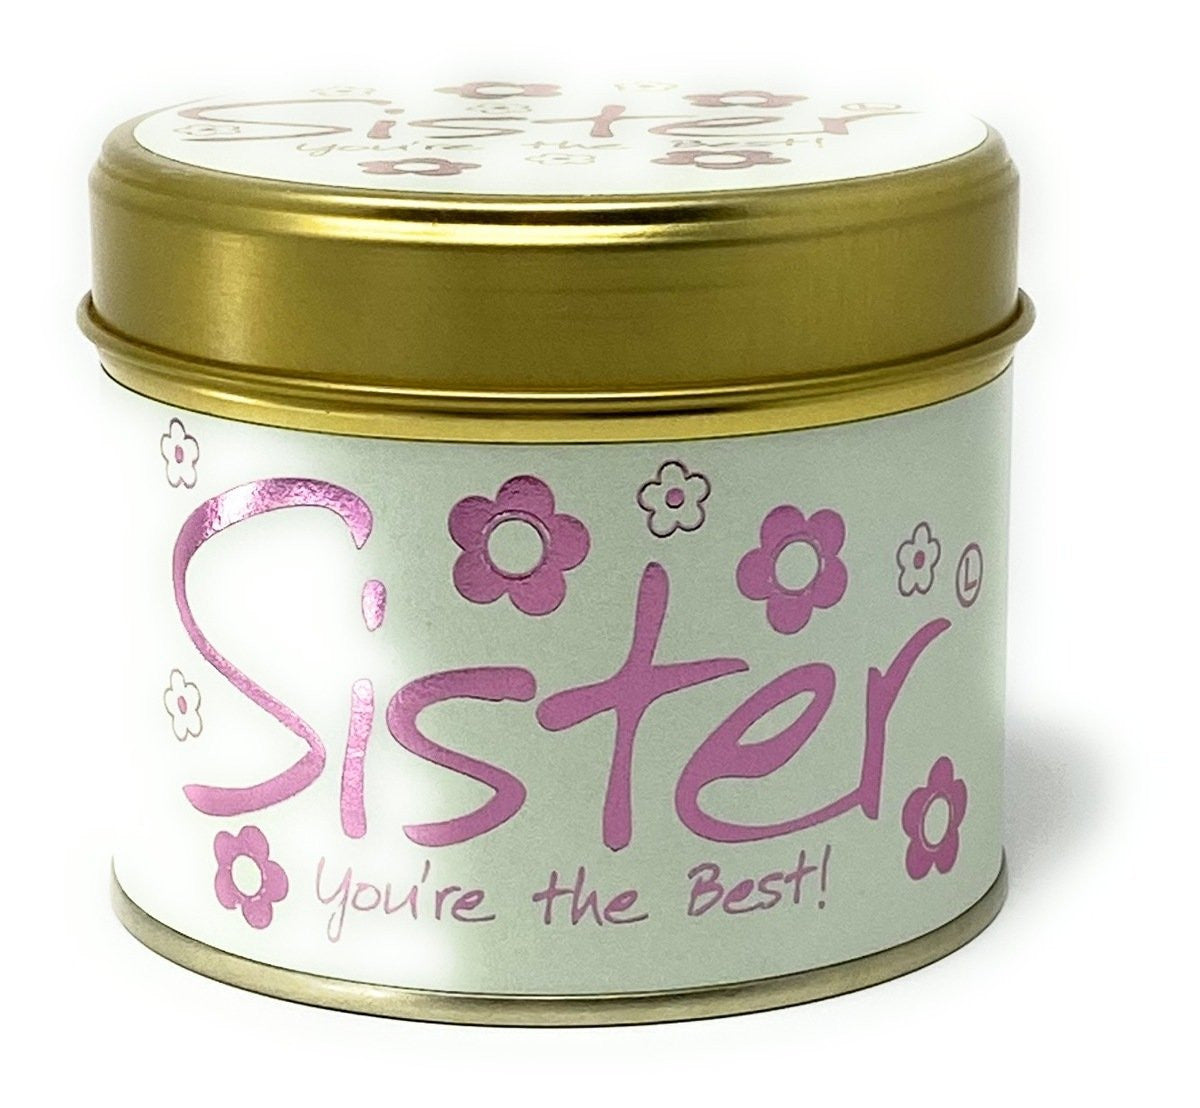 Sister - You're The Best! Scented Candle from Lily-Flame. Handmade in England.